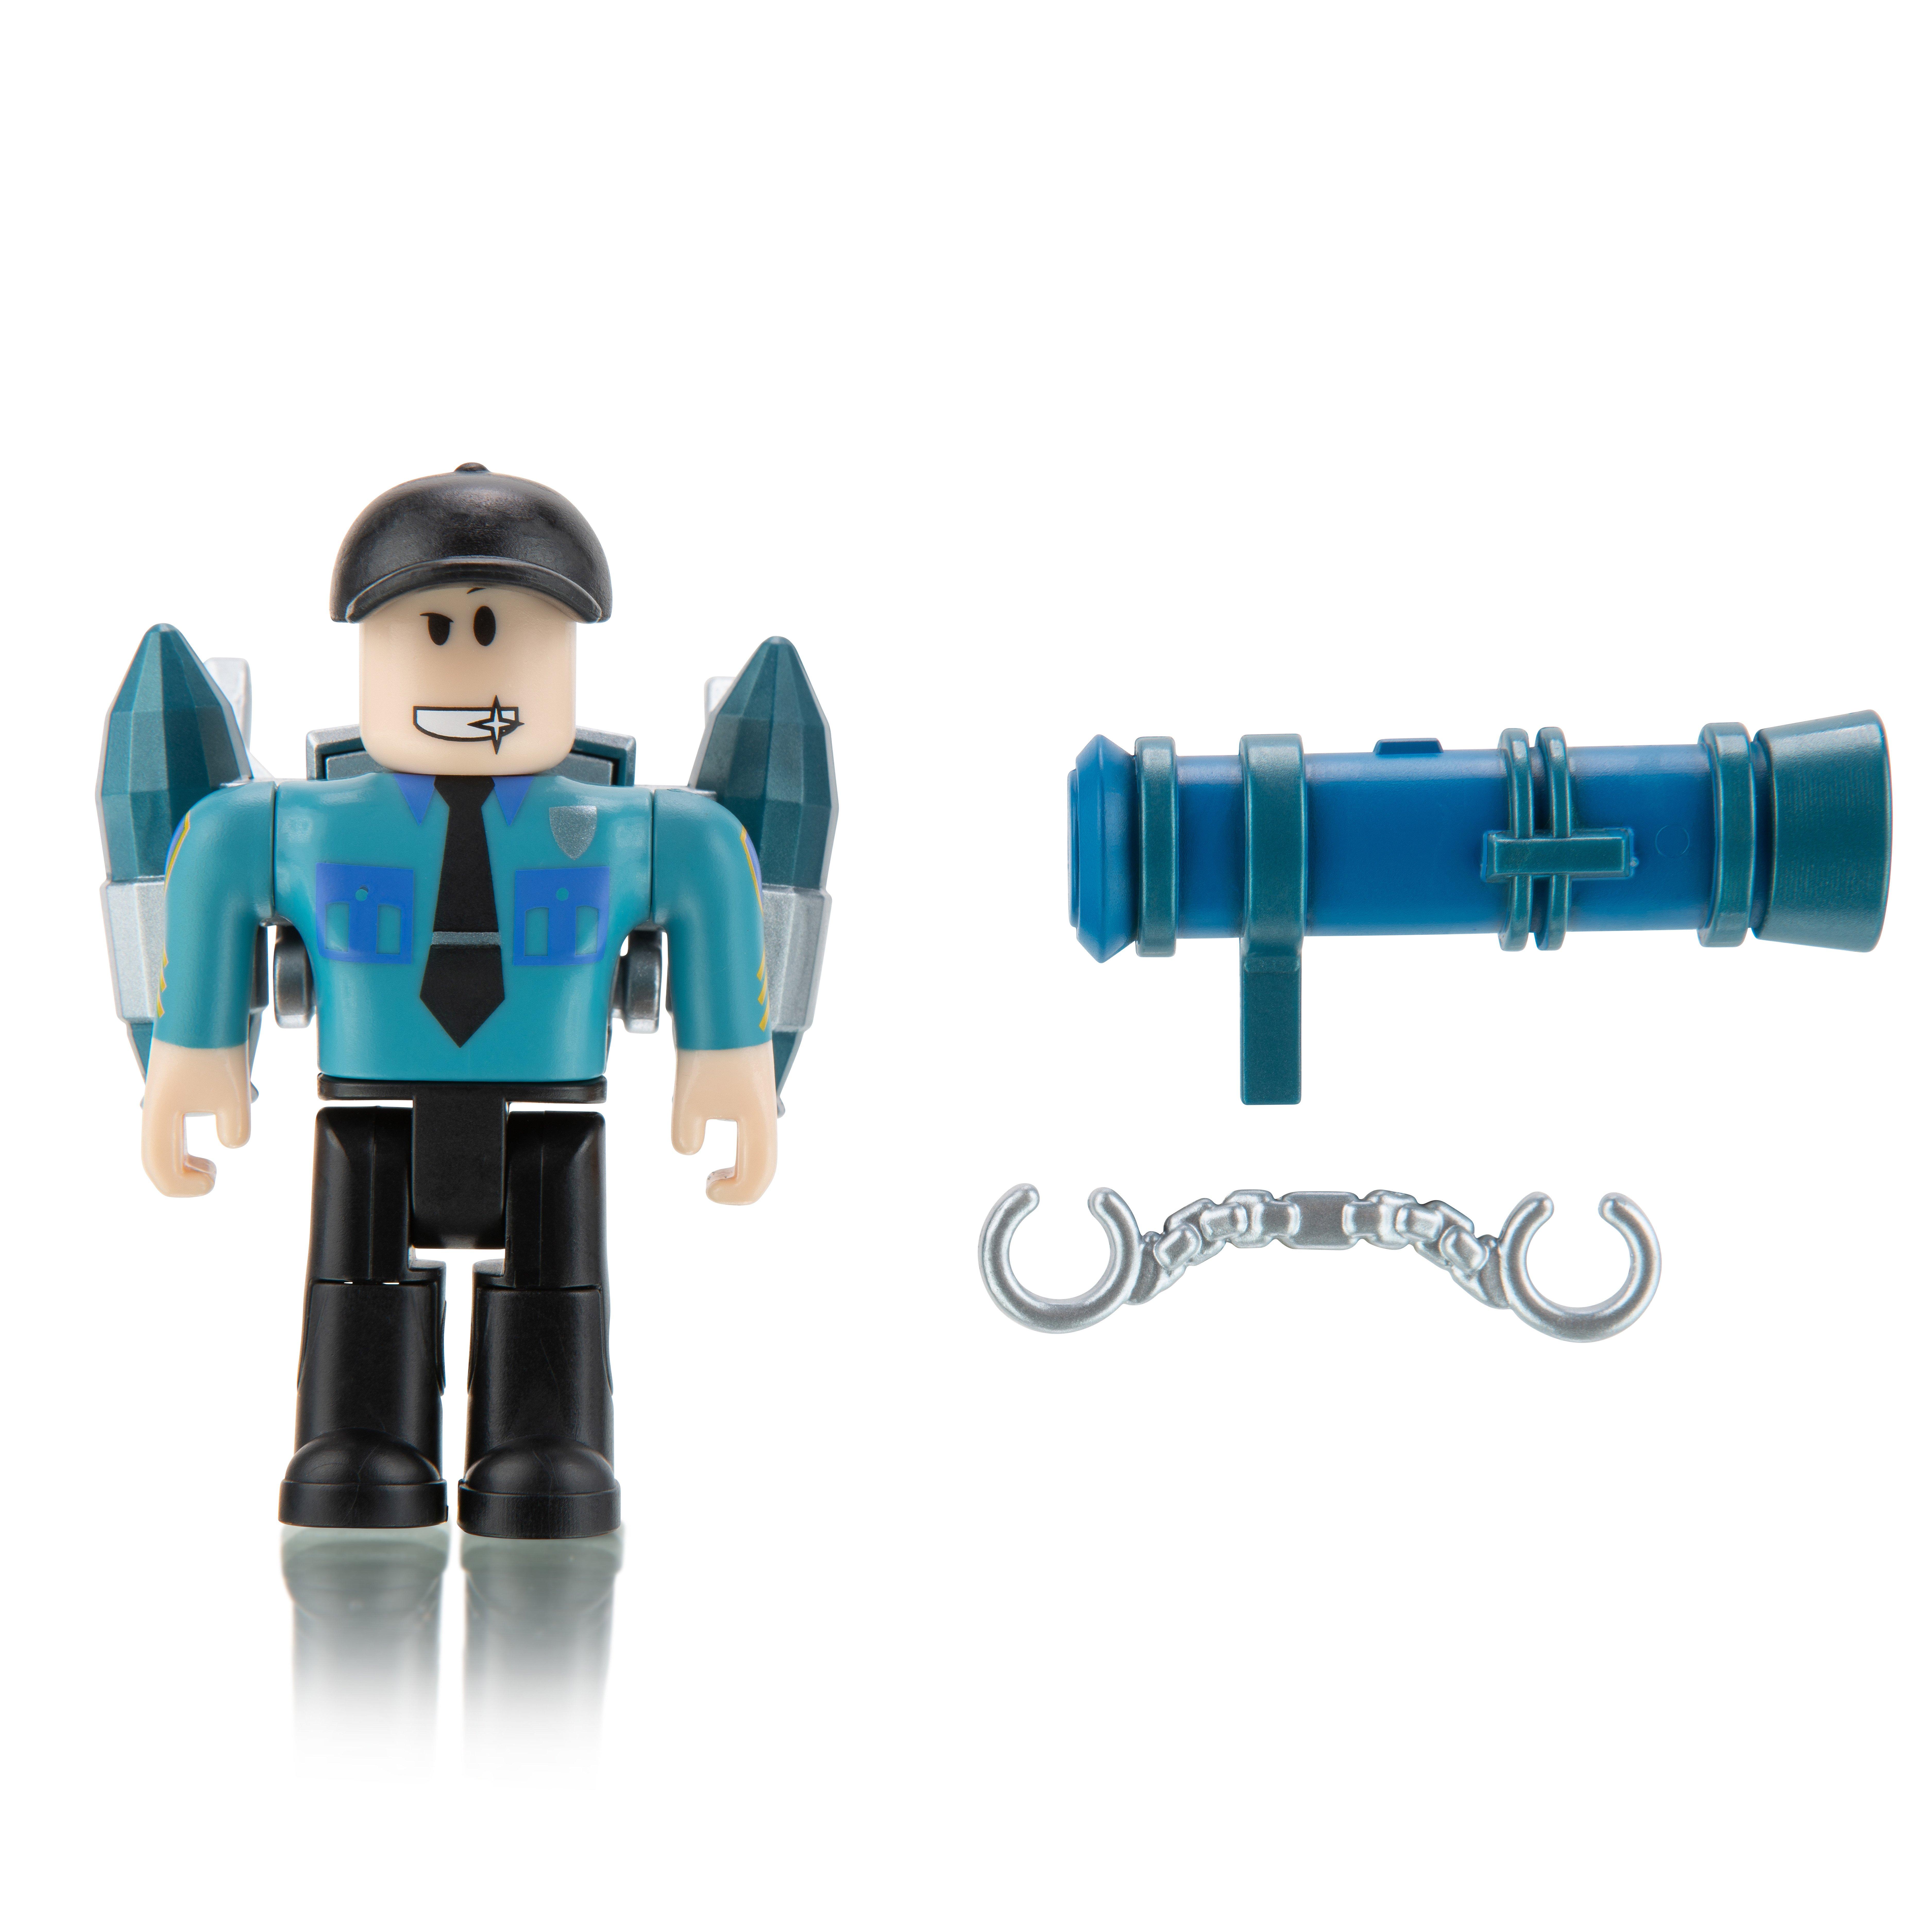 Roblox Action Collection Single Figure Pack Includes 1 Exclusive Virtual Item Styles May Vary Gamestop - roblox toys series 5 core packs